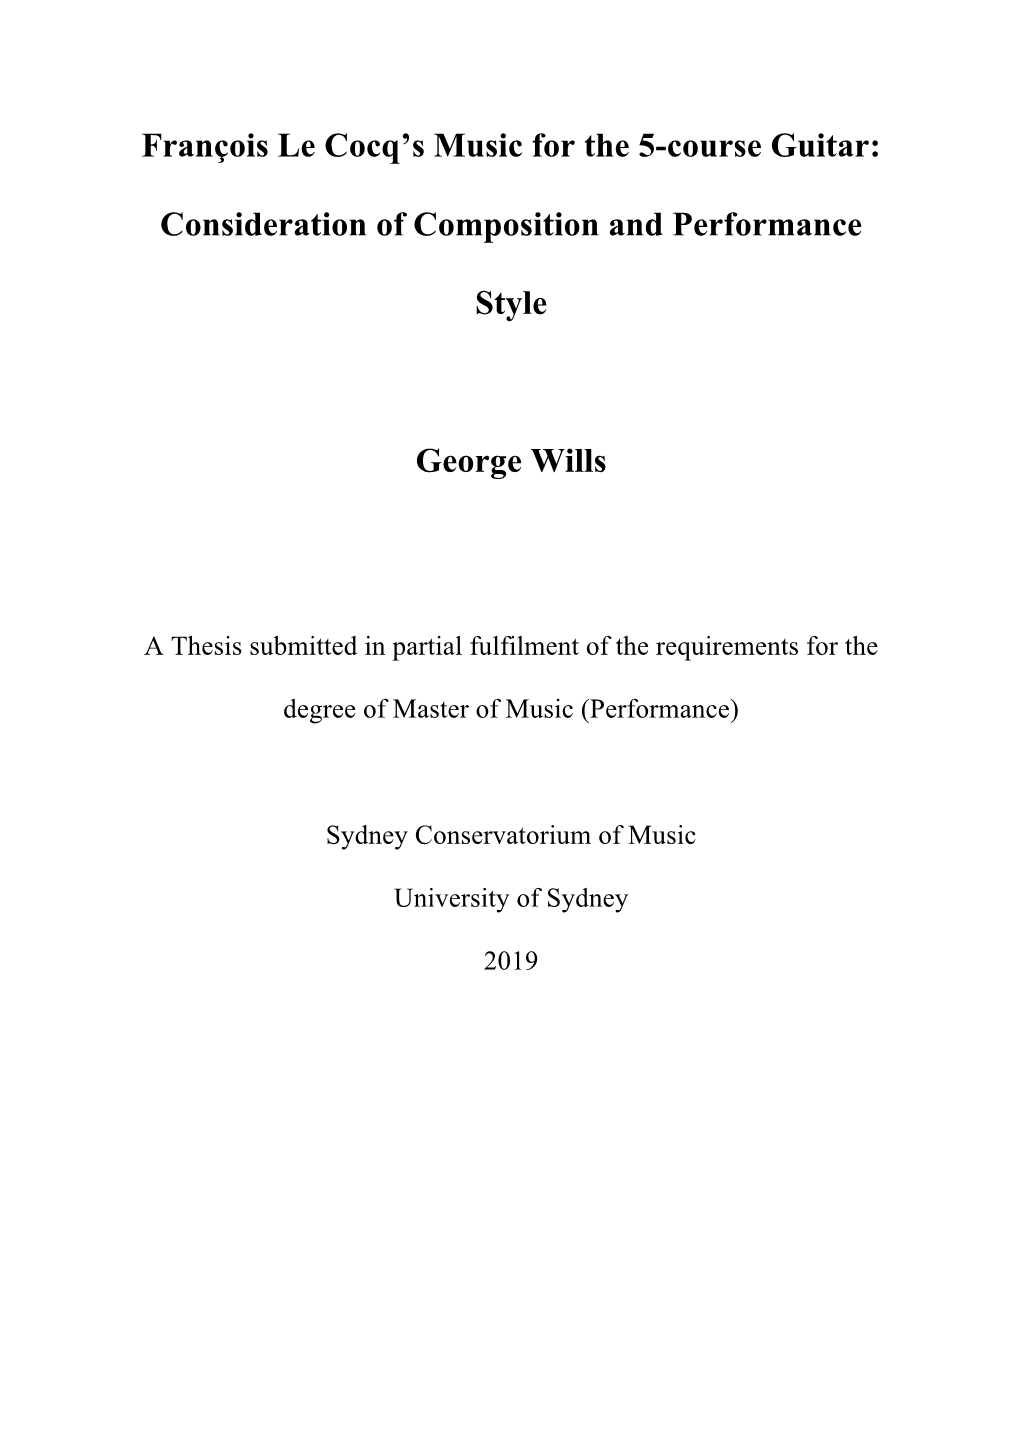 François Le Cocq's Music for the 5-Course Guitar: Consideration of Composition and Performance Style George Wills